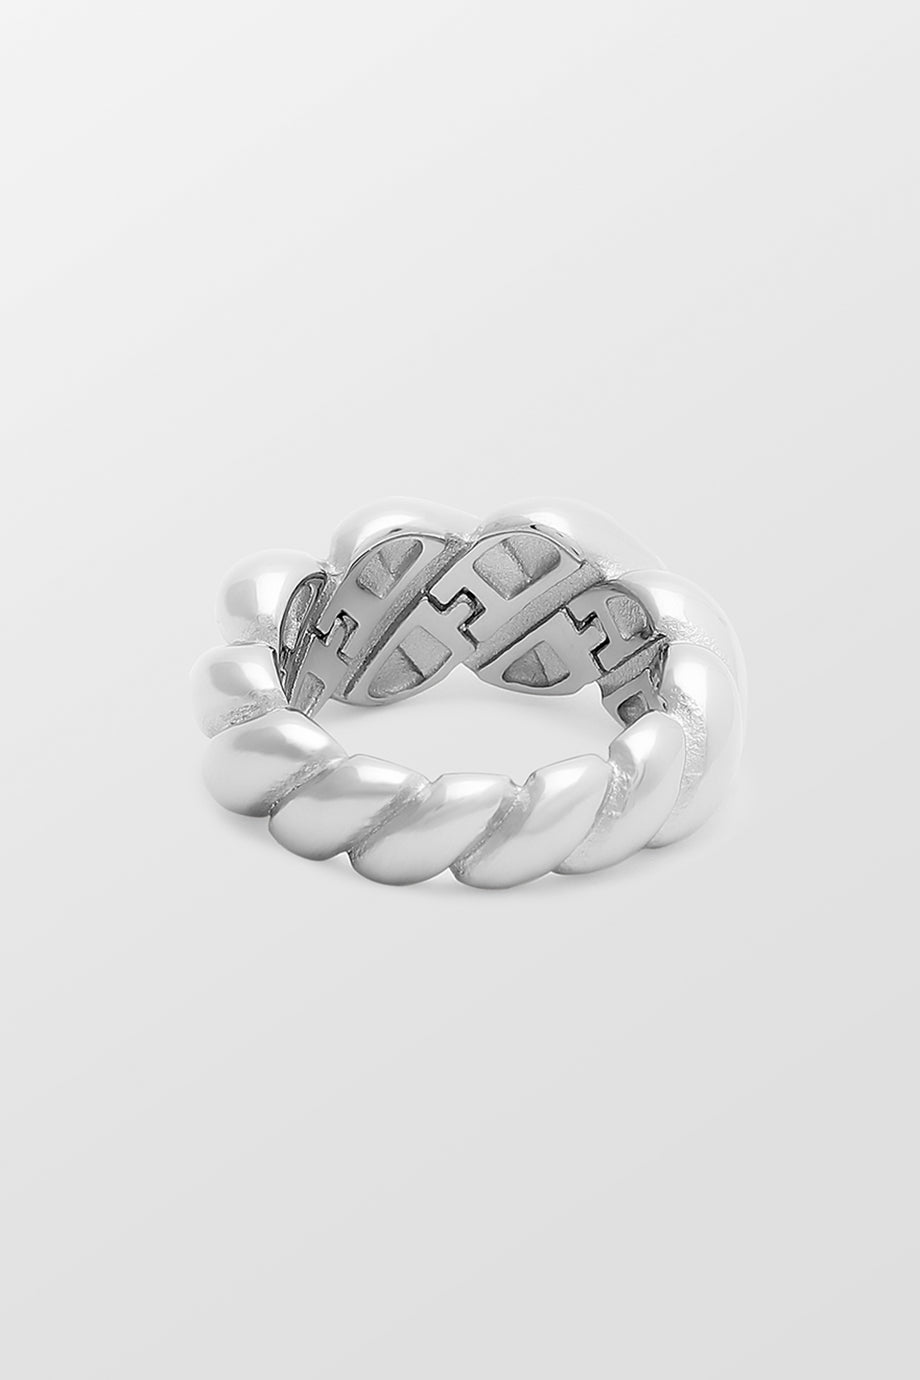 Silver Croissant Ring